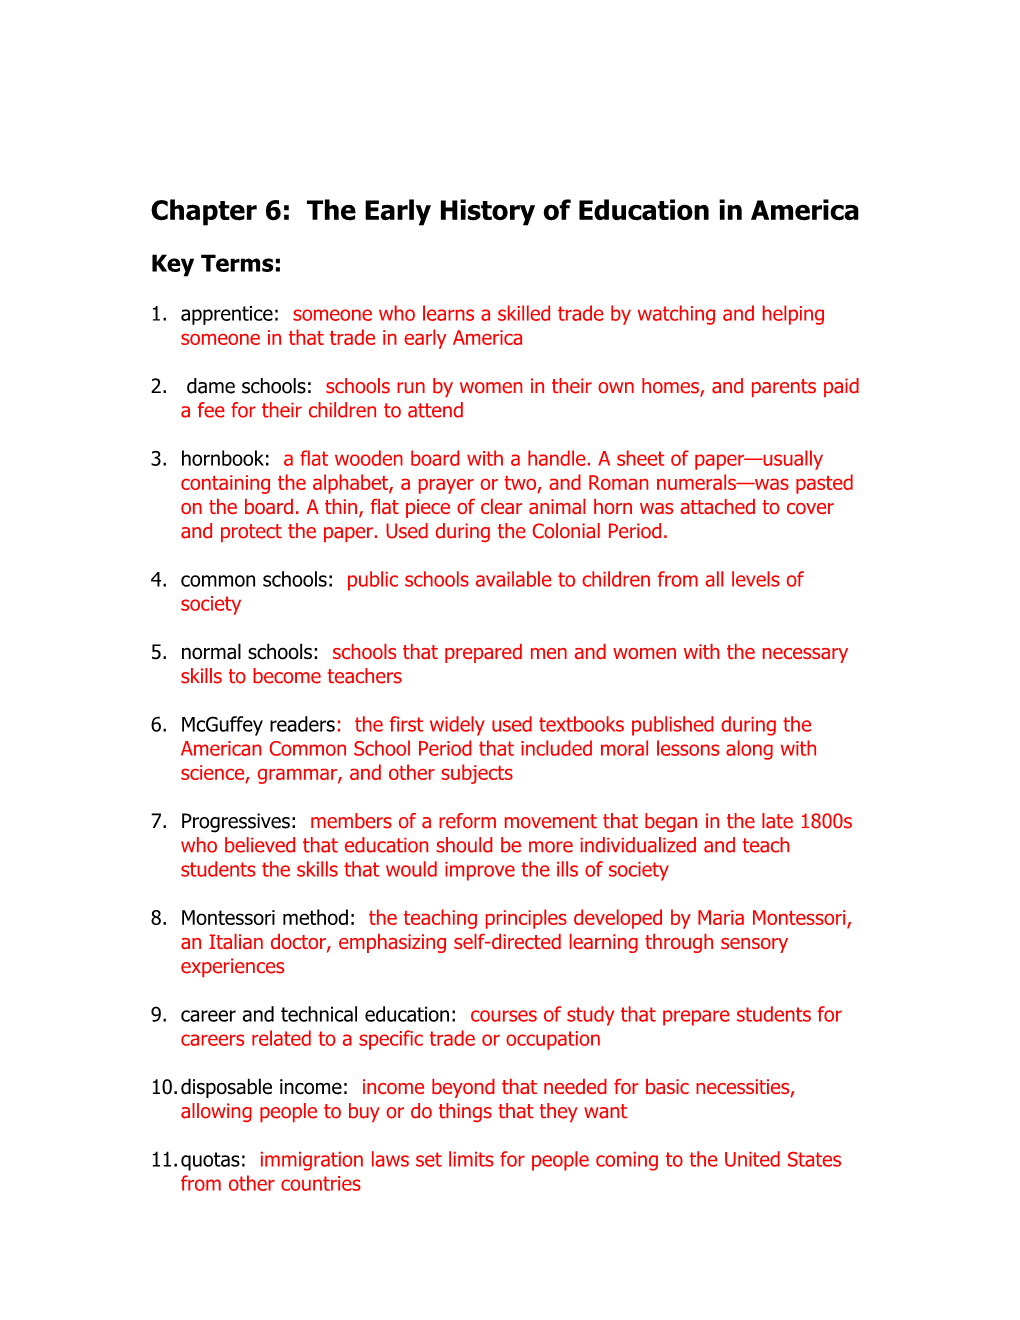 Chapter 6: the Early History of Education in America